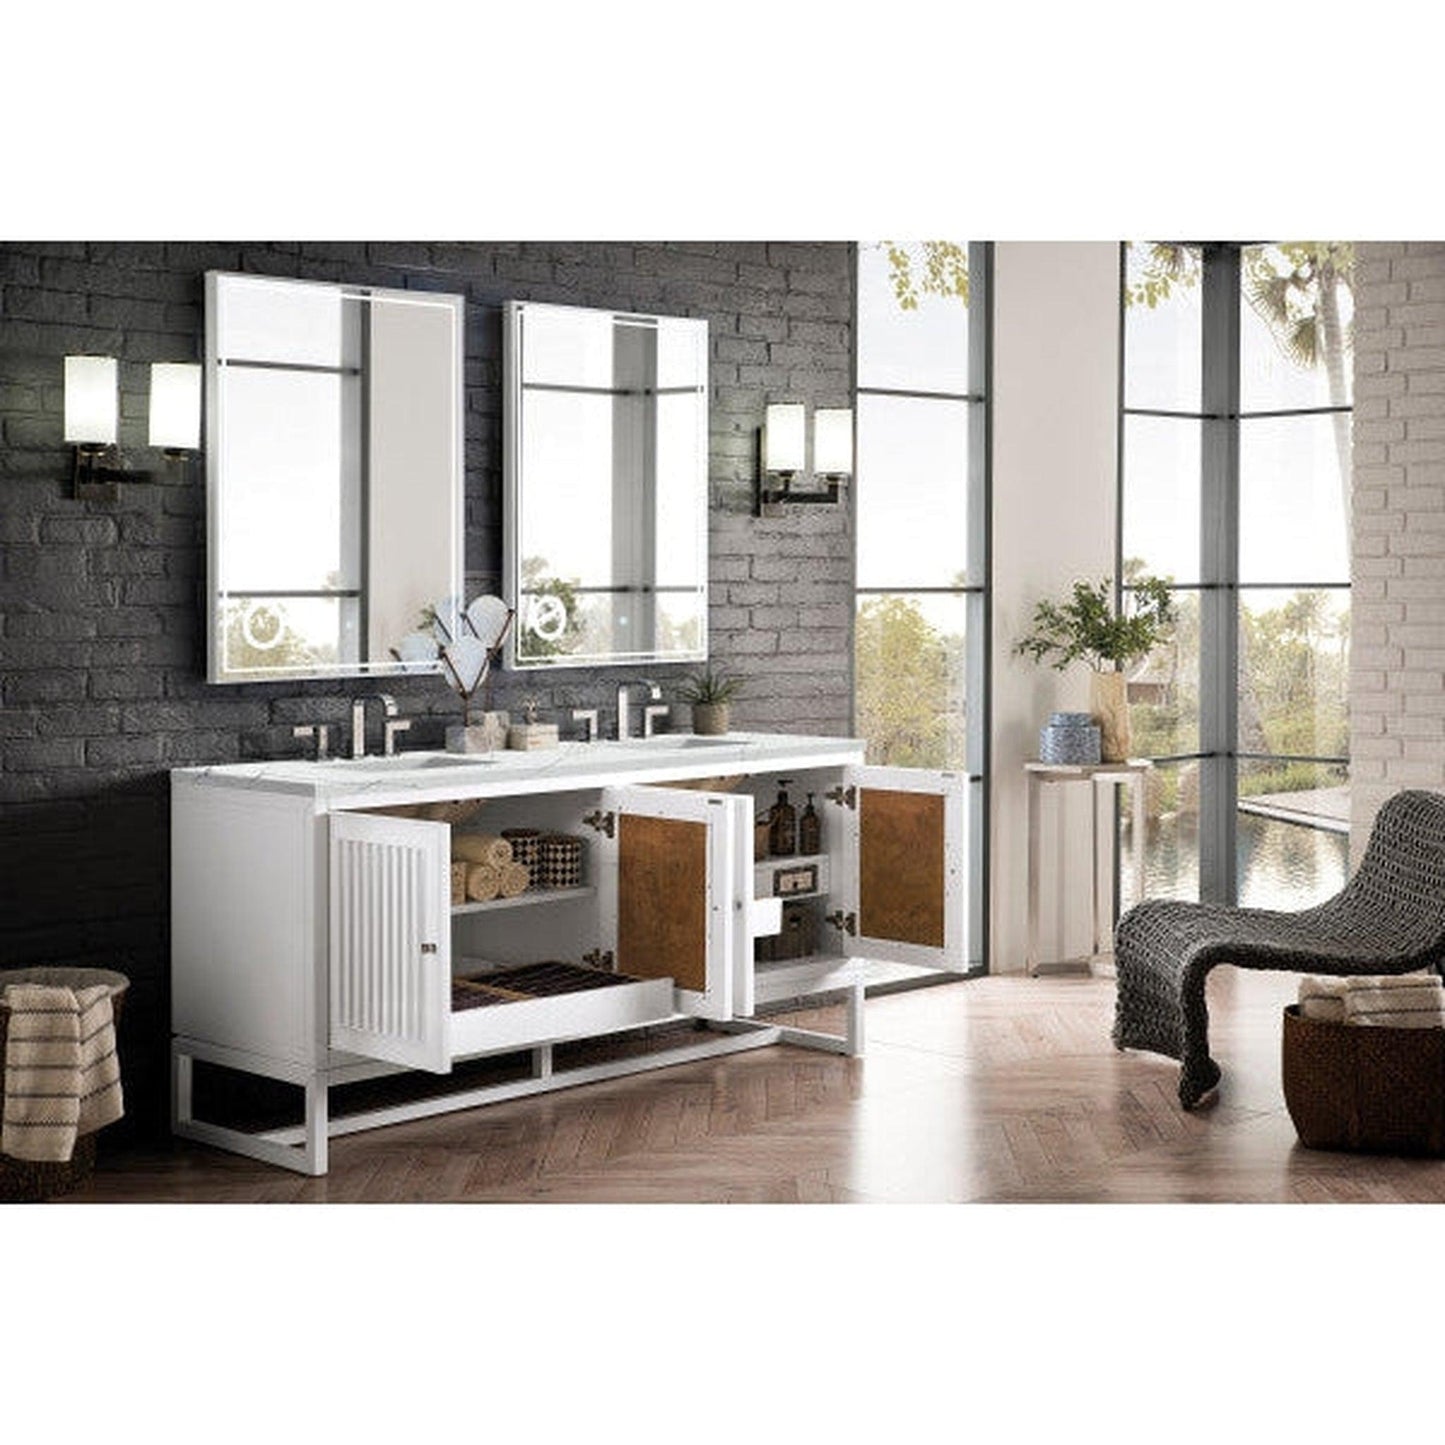 James Martin Athens 72" Double Glossy White Bathroom Vanity With 1" Ethereal Noctis Quartz Top and Rectangular Ceramic Sink